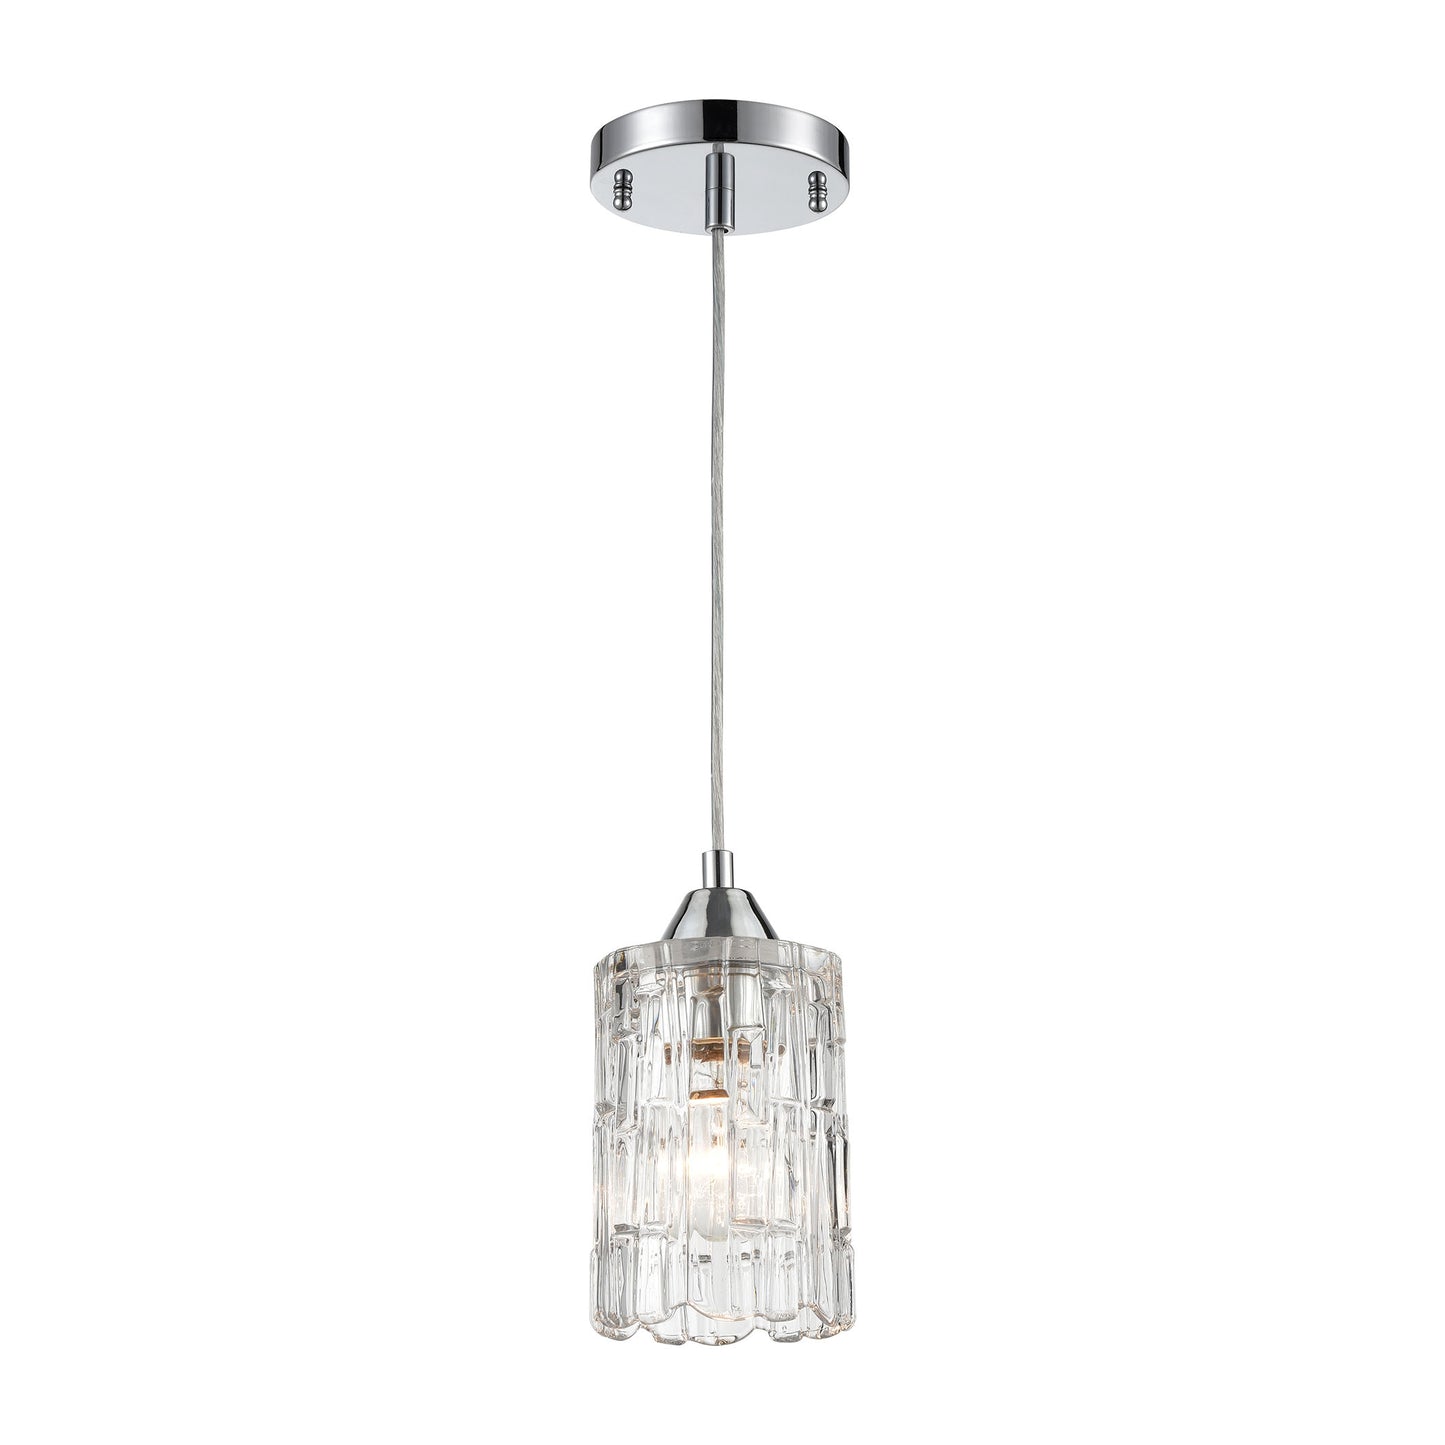 ELK Lighting 17414/1 - Ezra 5" Wide 1-Light Mini Pendant in Polished Chrome with Textured Clear Crys